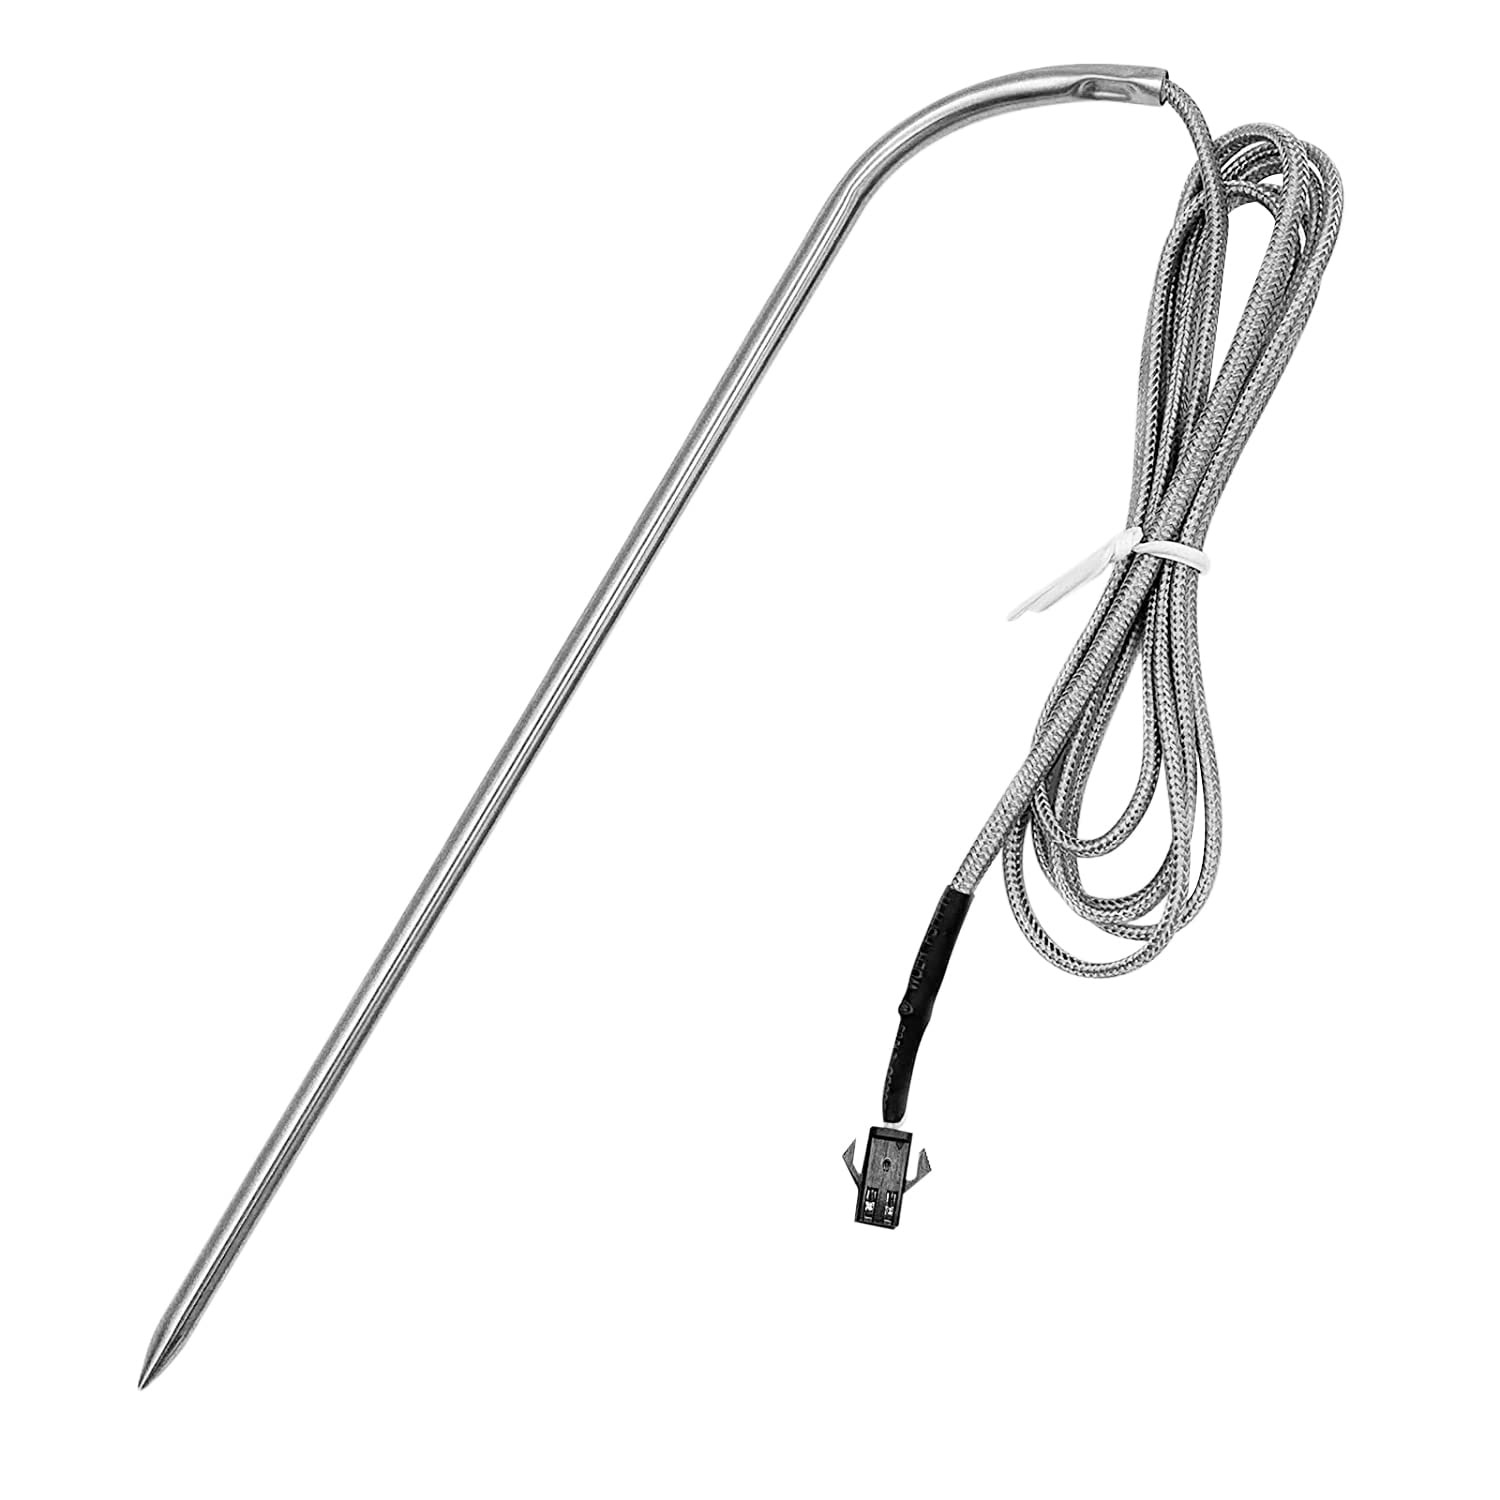 YAOAWE Temperature Meat Probe Replacement for Recteq Wood Pellet Grill -  Rec Tec Temp Probe with Probe Holder Clip 